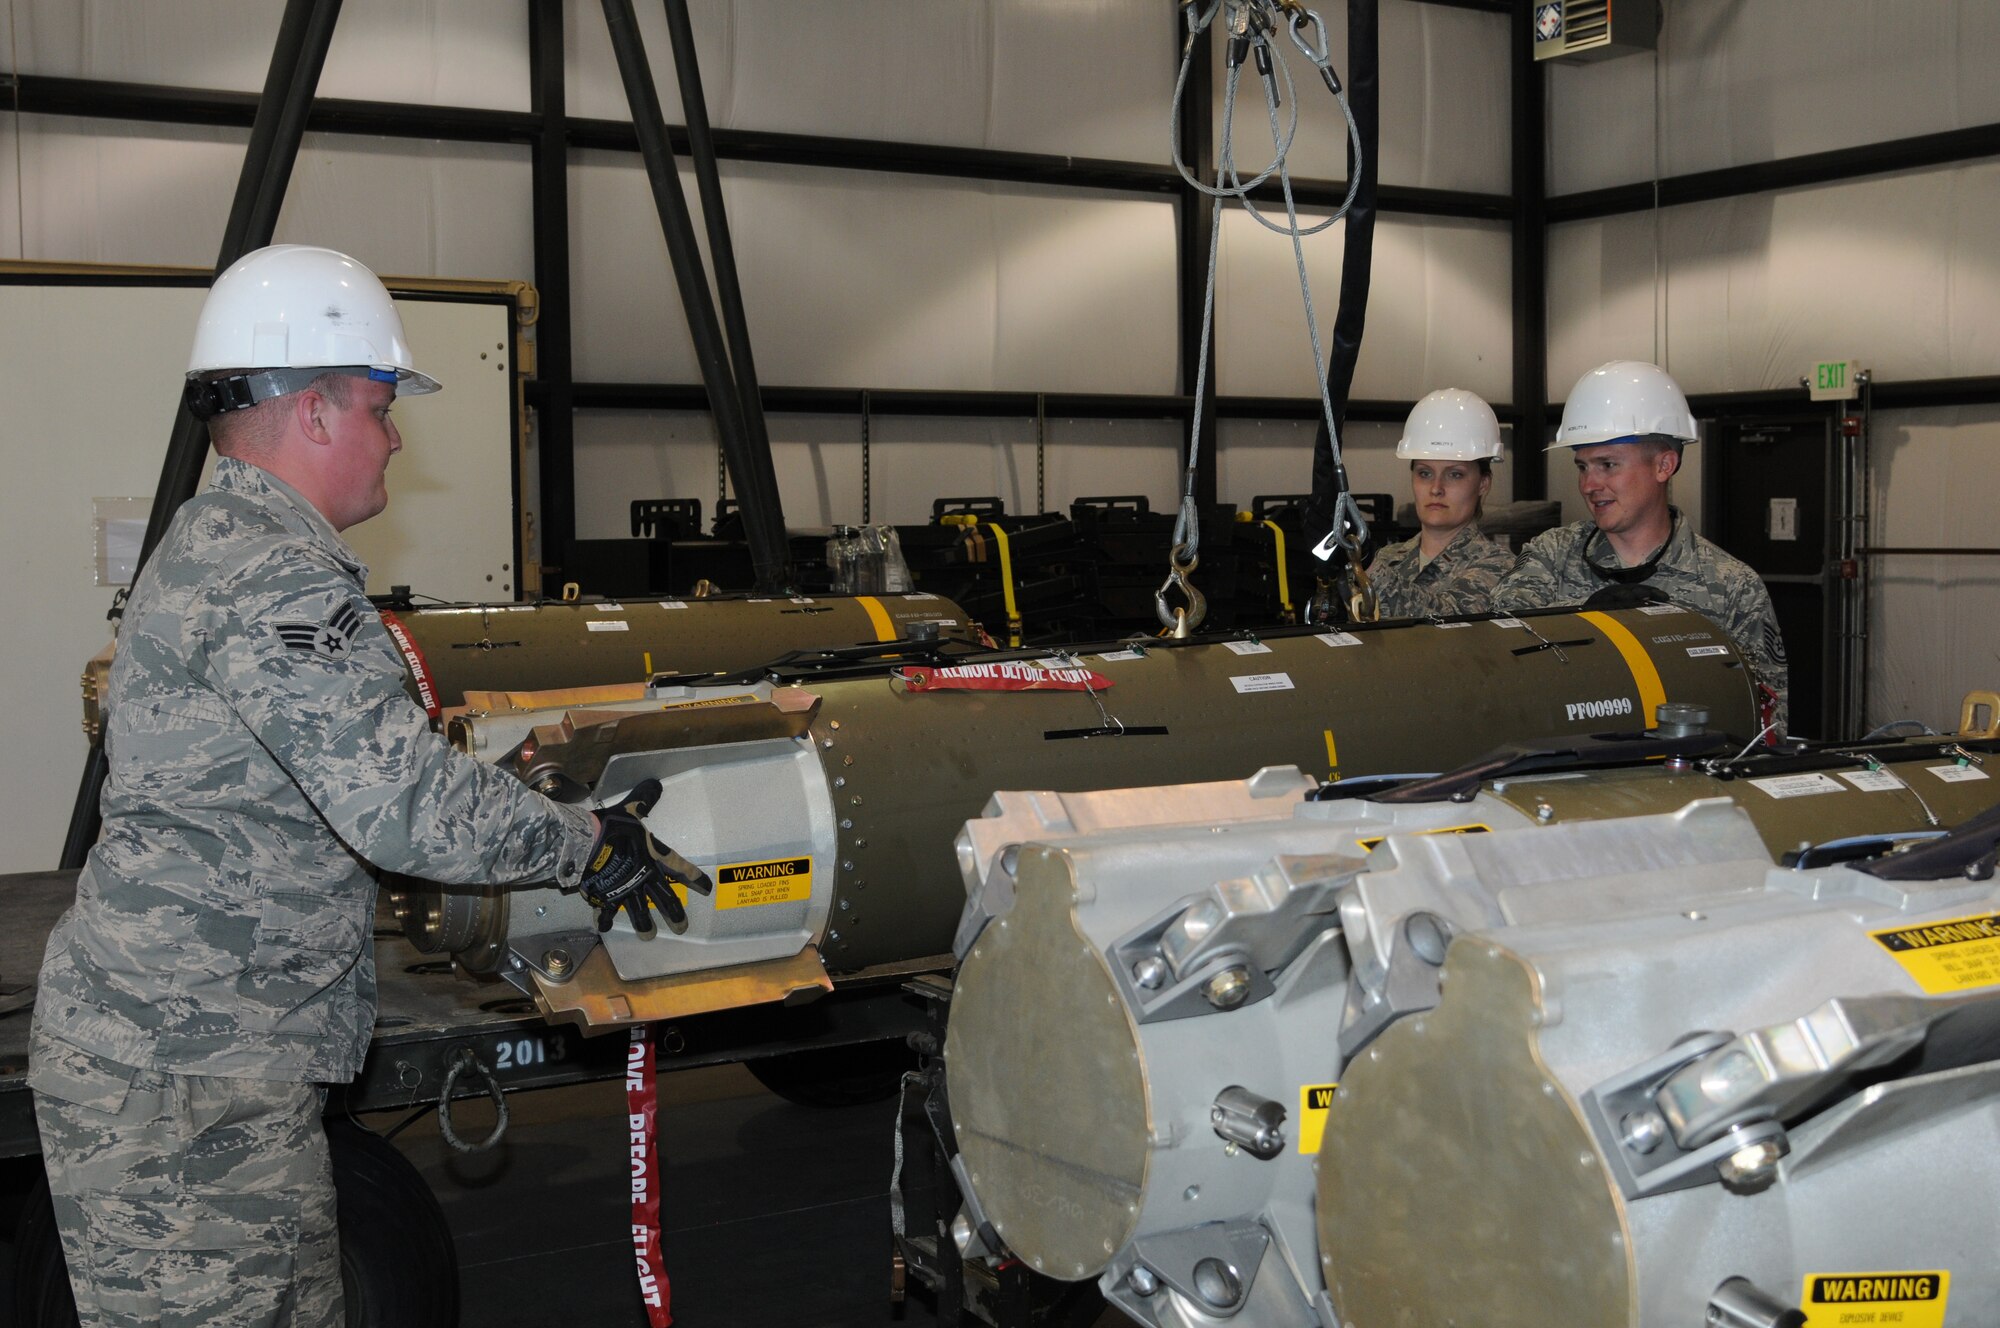 148th Fighter Wing Munition Airmen prepare weapons for Combat Hammer, May 1, 2015 while at Hill AFB, Utah.  Combat Hammer is a Weapons System Evaluation Program (WSEP) that evaluates the entire weapon process, from build-up to employment.  (U.S. Air National Guard photo by Master Sgt. Ralph Kapustka)